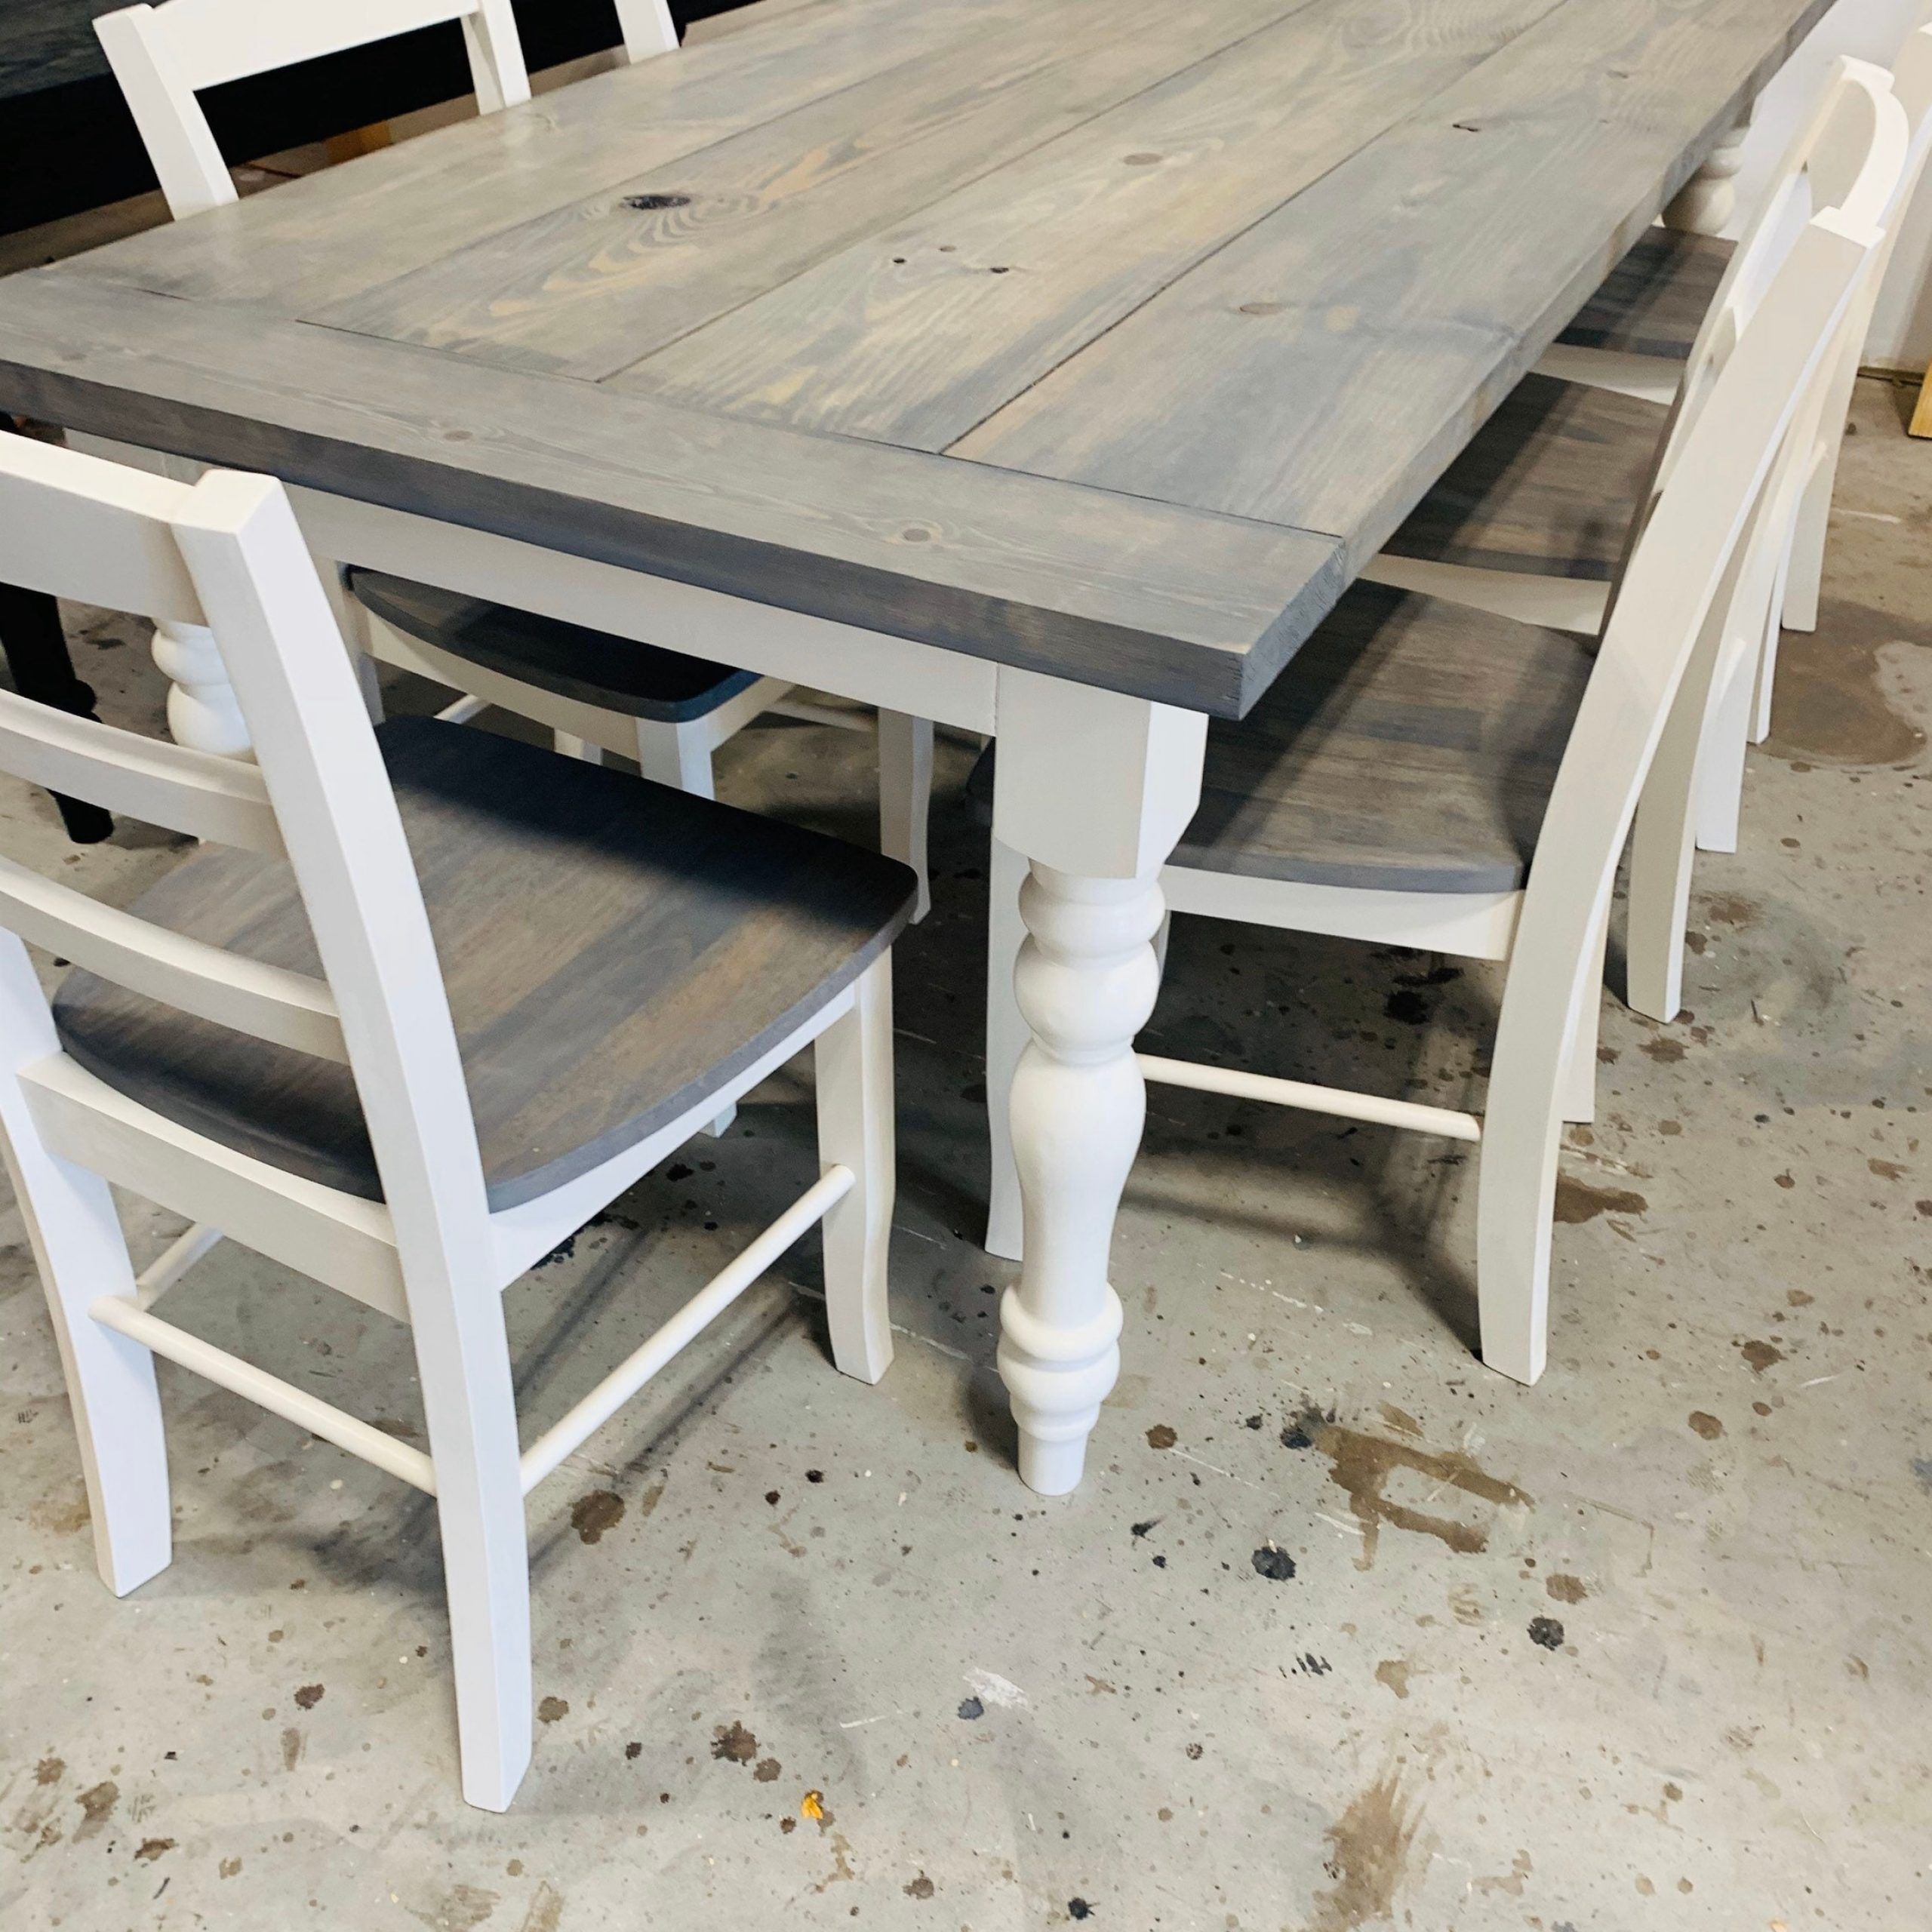 7Ft Rustic Farmhouse Table With Turned Legs, Chair Set In 2017 Gray Dining Tables (View 8 of 15)